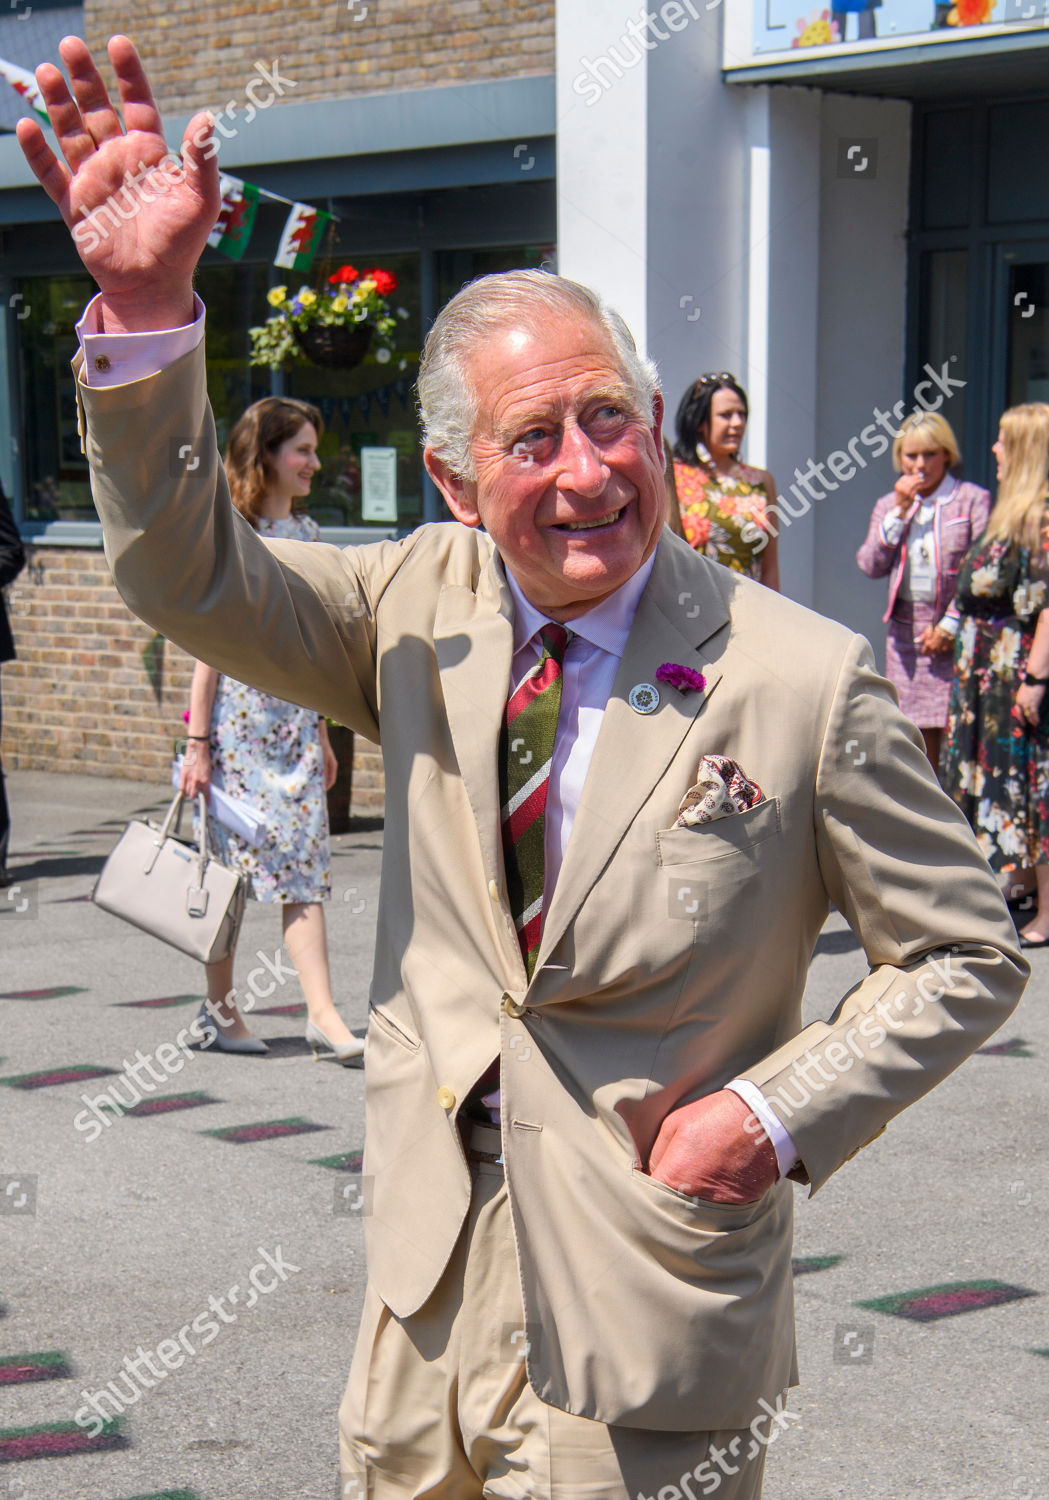 prince-charles-and-camilla-duchess-of-cornwall-visit-to-wales-uk-shutterstock-editorial-10327726cn.jpg